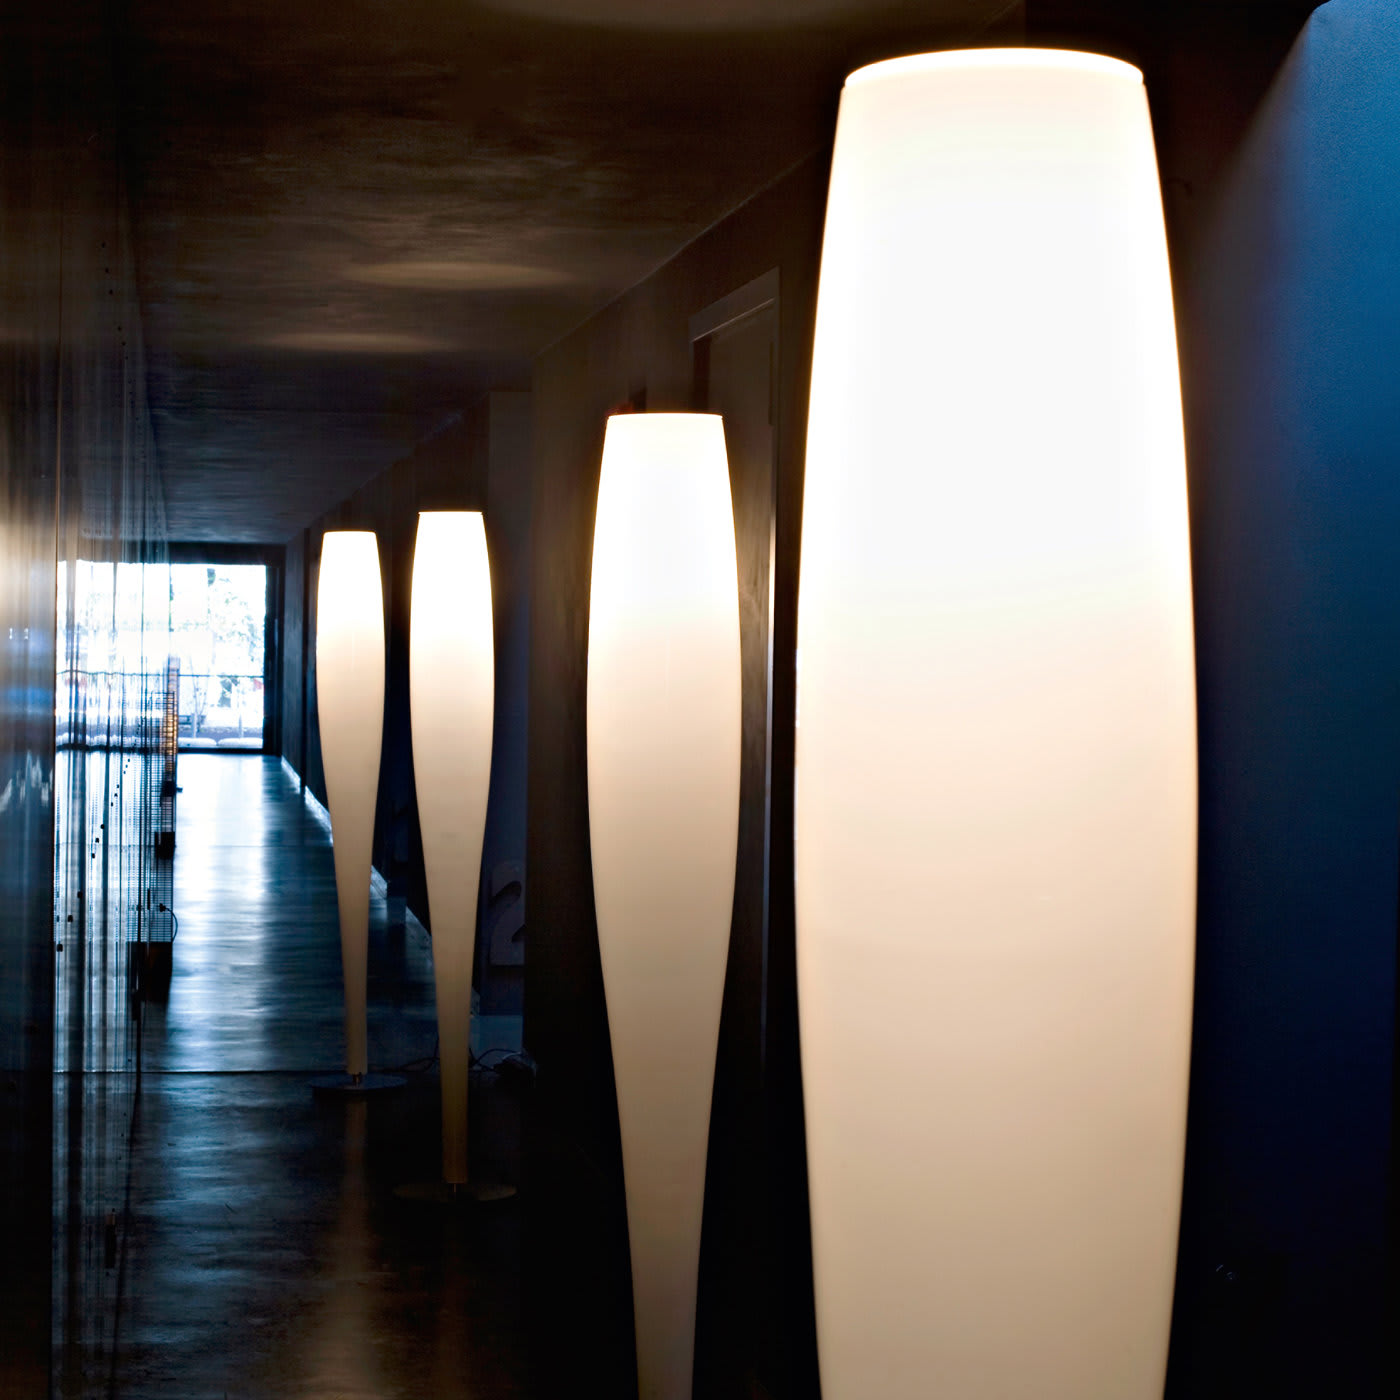 Stand Floor Lamp by Christophe Pillet - Mazzega 1946